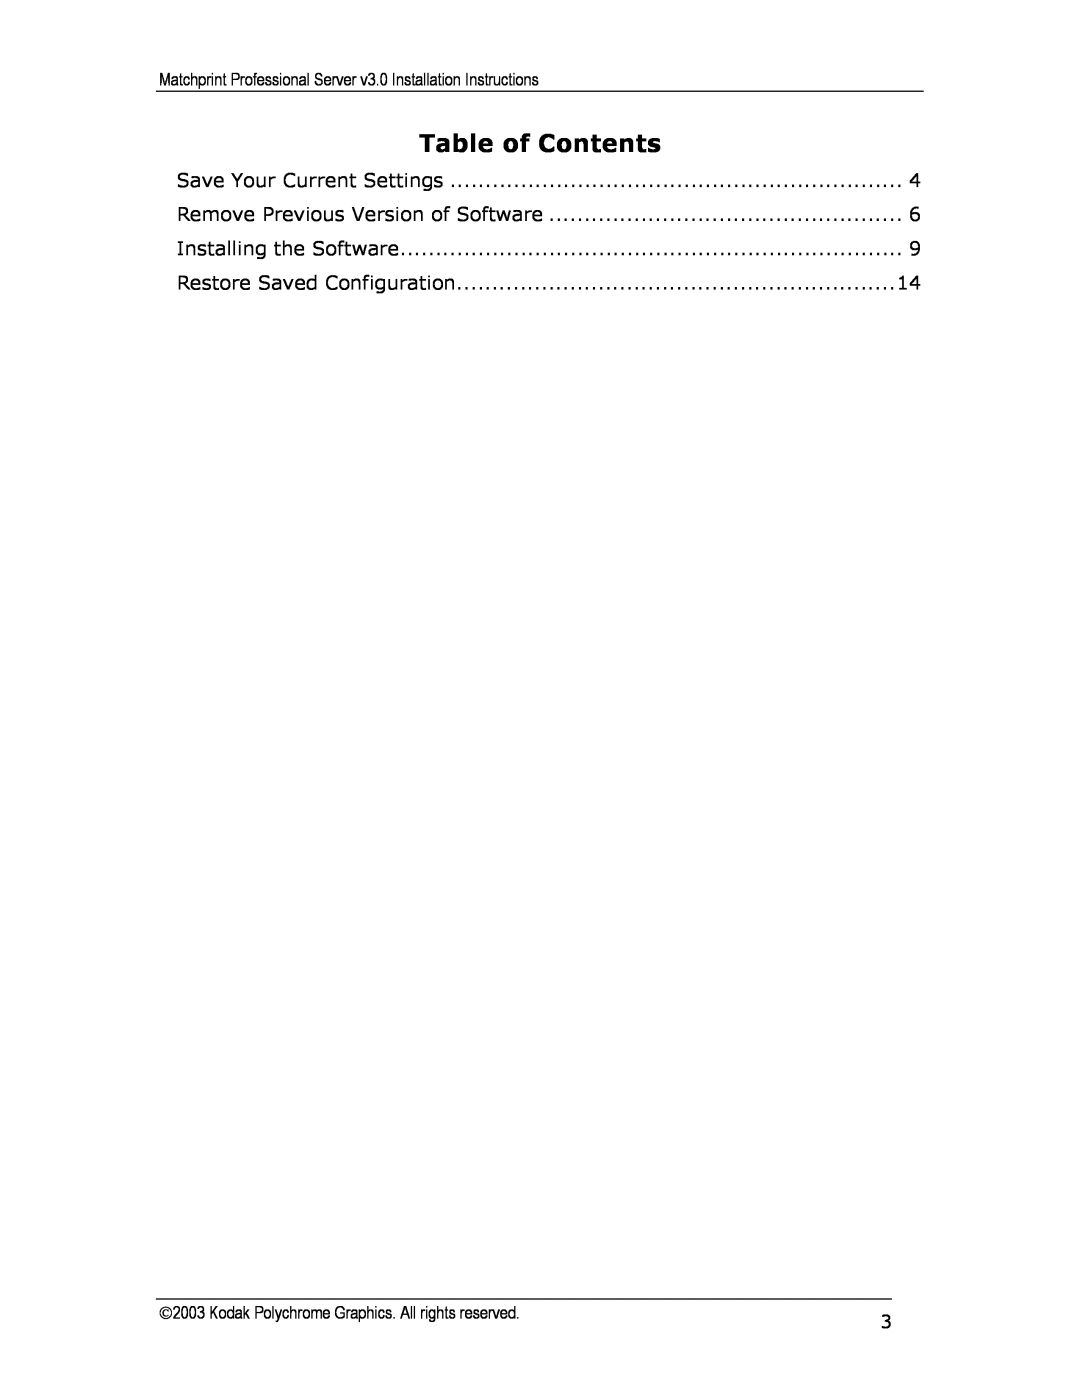 Kodak KY0730482 Table of Contents, Save Your Current Settings, Remove Previous Version of Software 